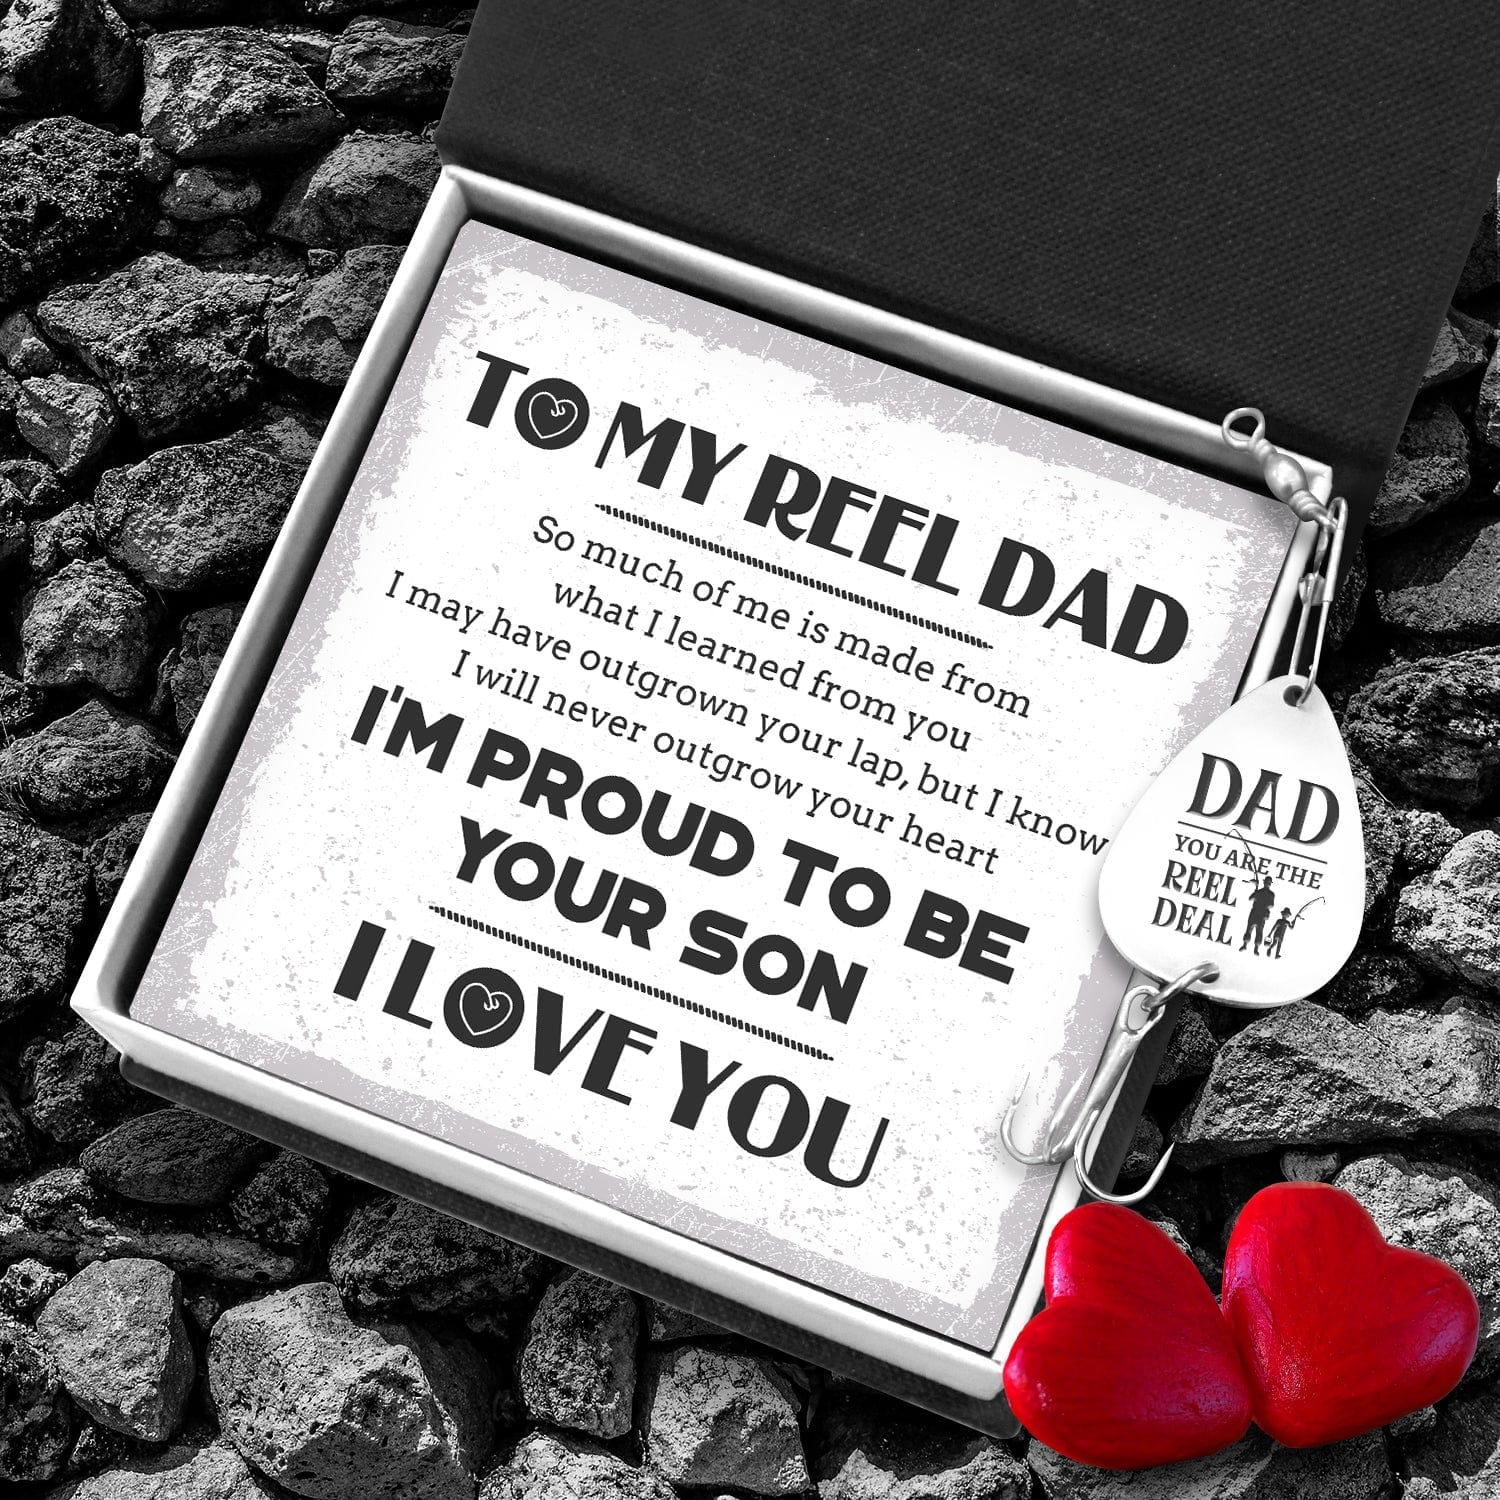 Engraved Fishing Hook - Fishing - To My Reel Dad - I'm Proud To Be Your Son - Gfa18026